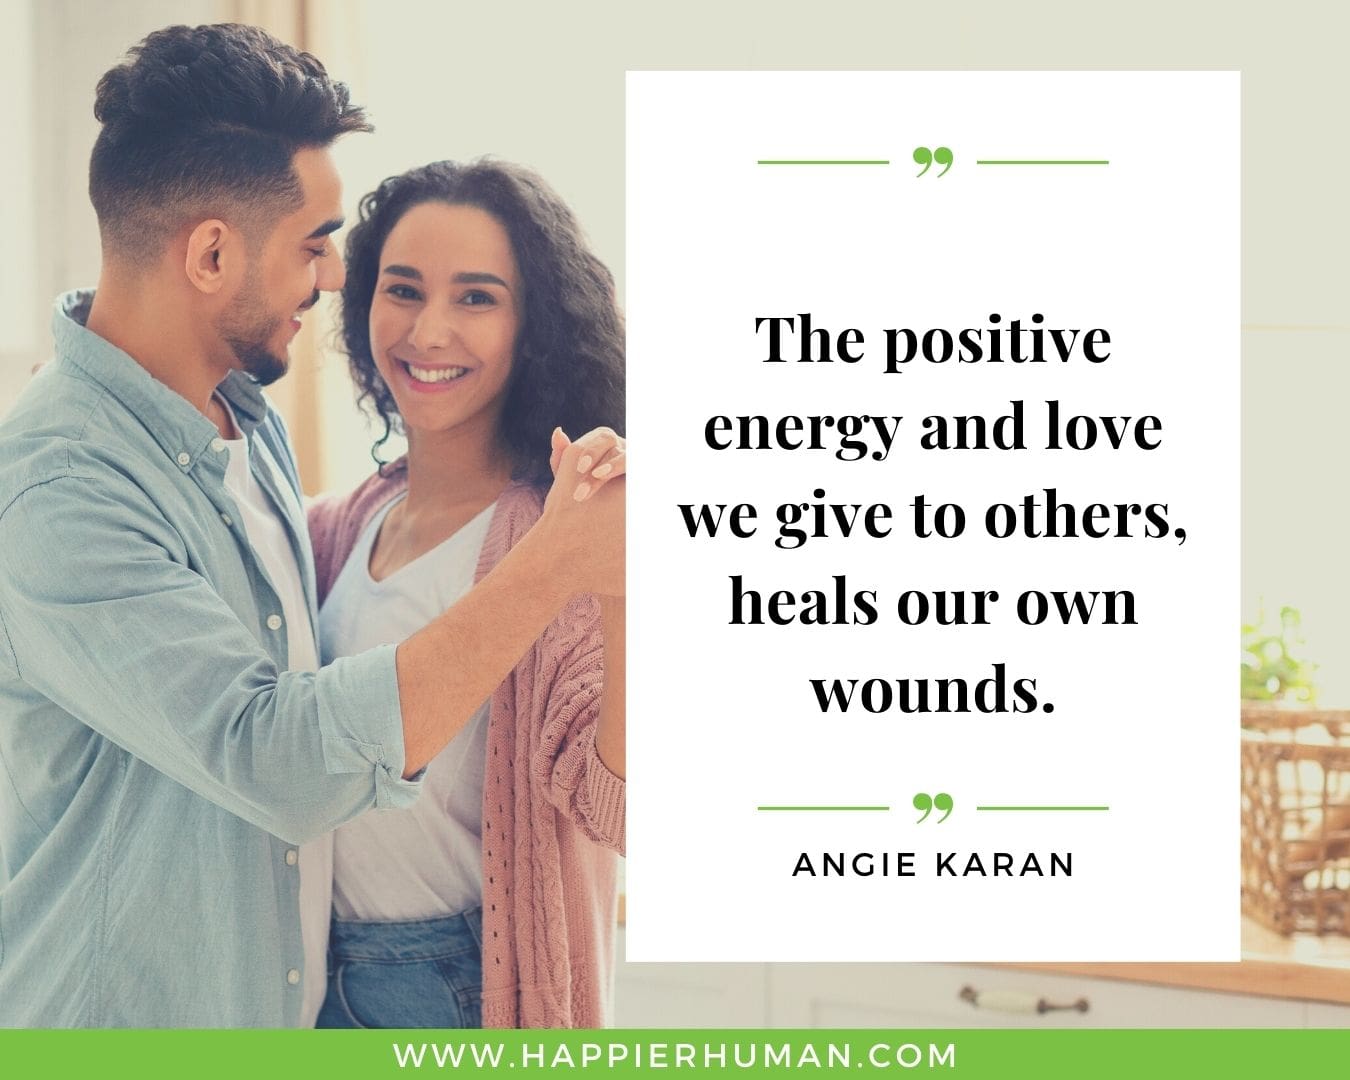 Positive Energy Quotes - “The positive energy and love we give to others, heals our own wounds.” - Angie Karan